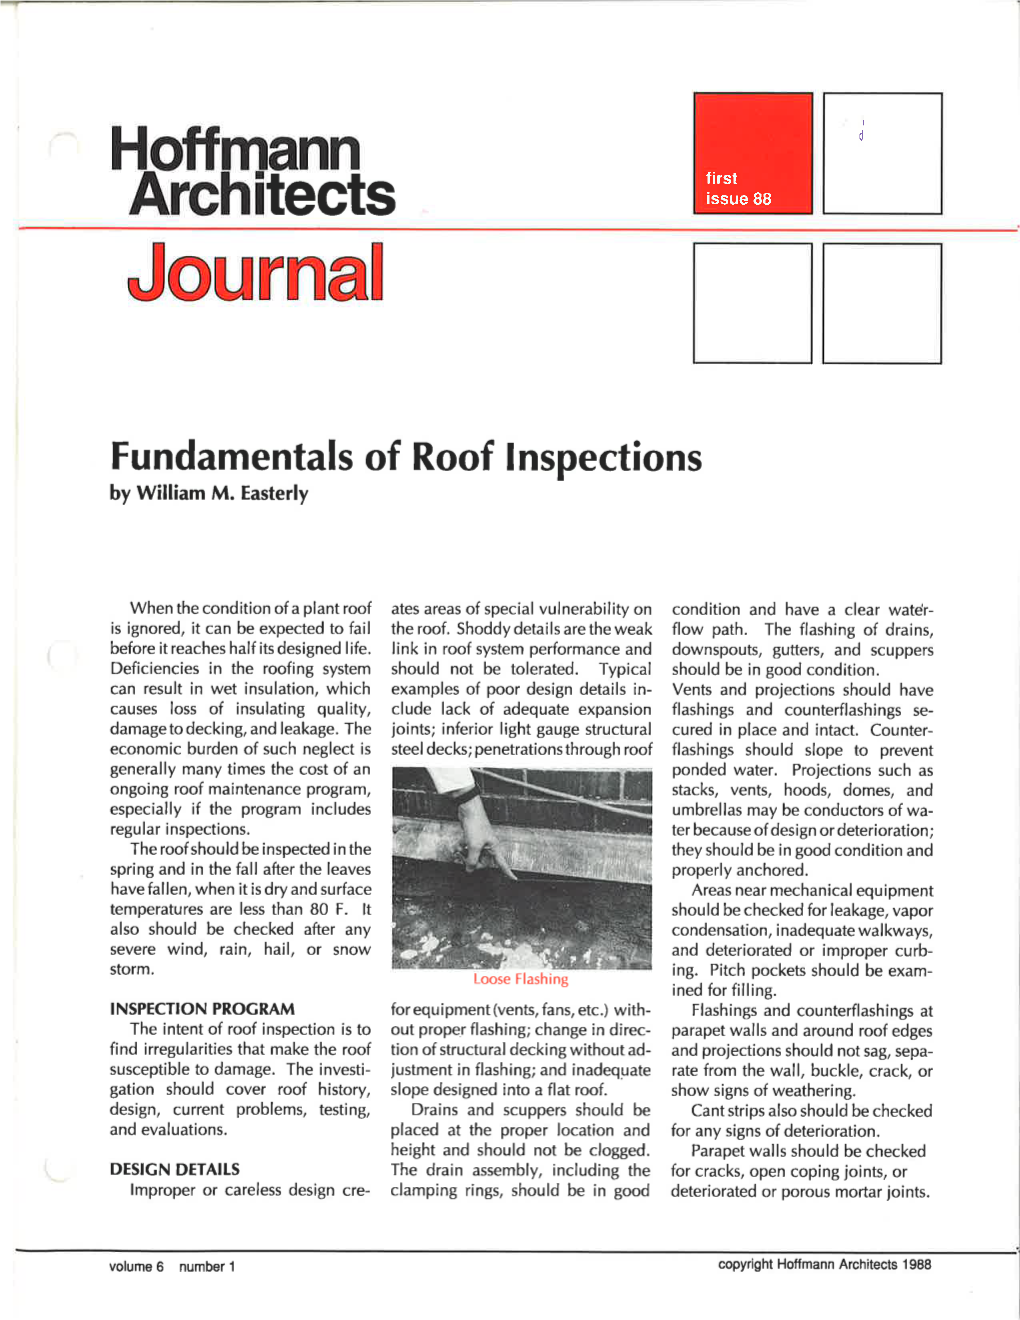 Fundamentals of Roof Lnspections by William M